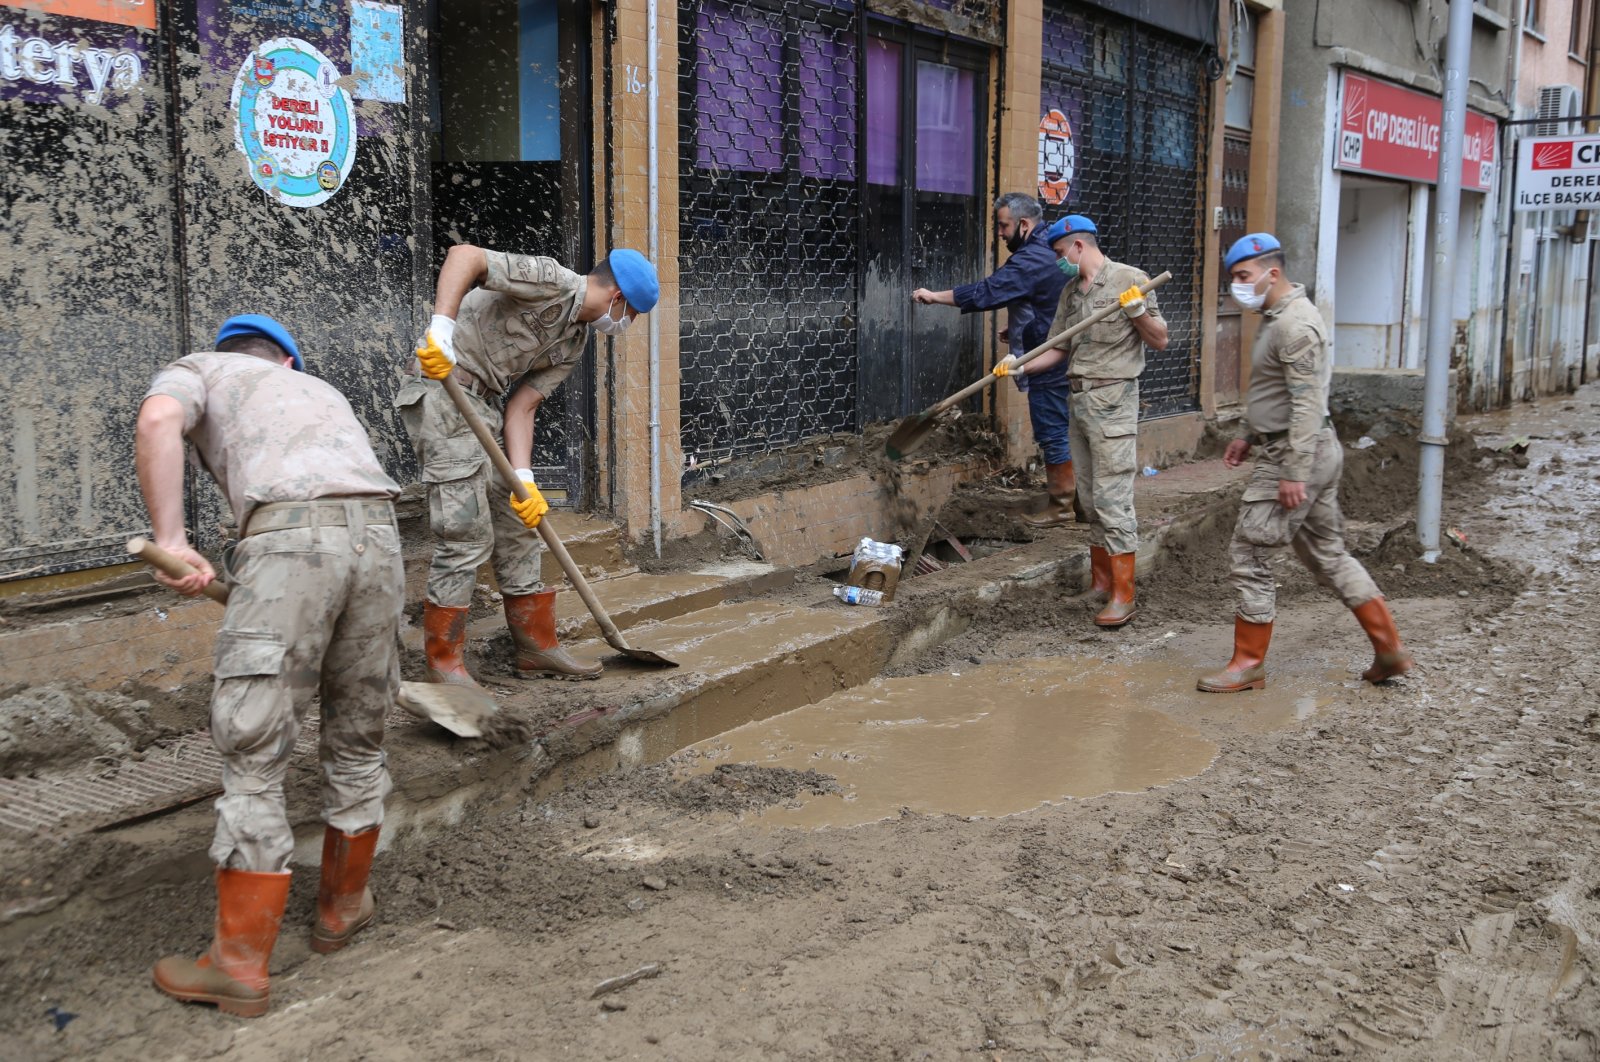 Soldiers help clean the mud in front of a shop in Dereli district, in Giresun, northern Turkey, Aug. 27, 2020. (AA Photo)